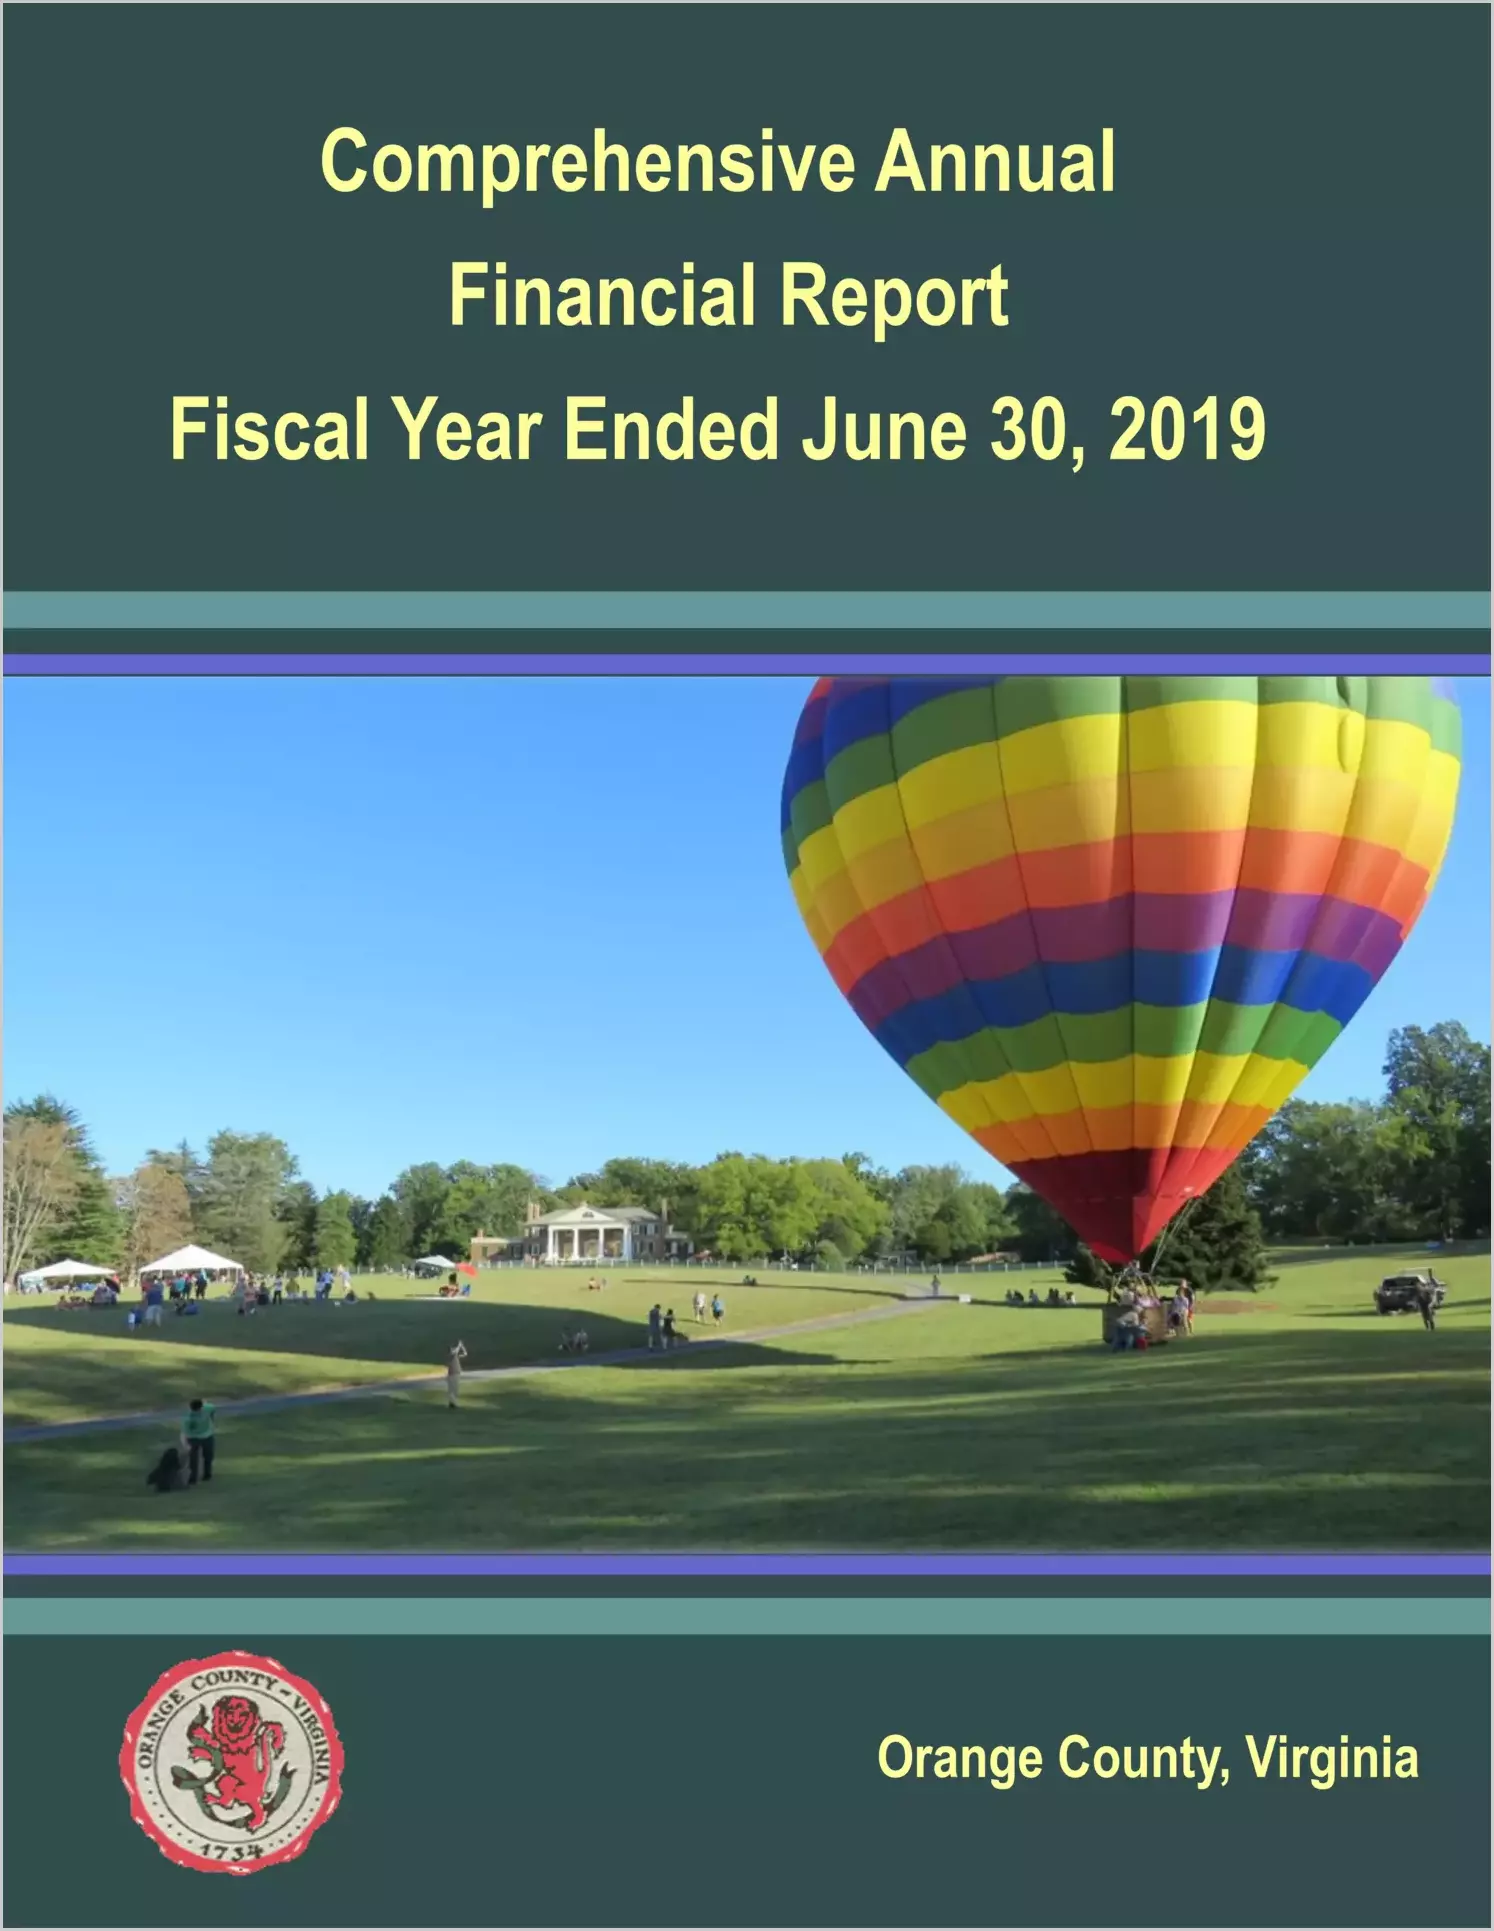 2019 Annual Financial Report for County of Orange